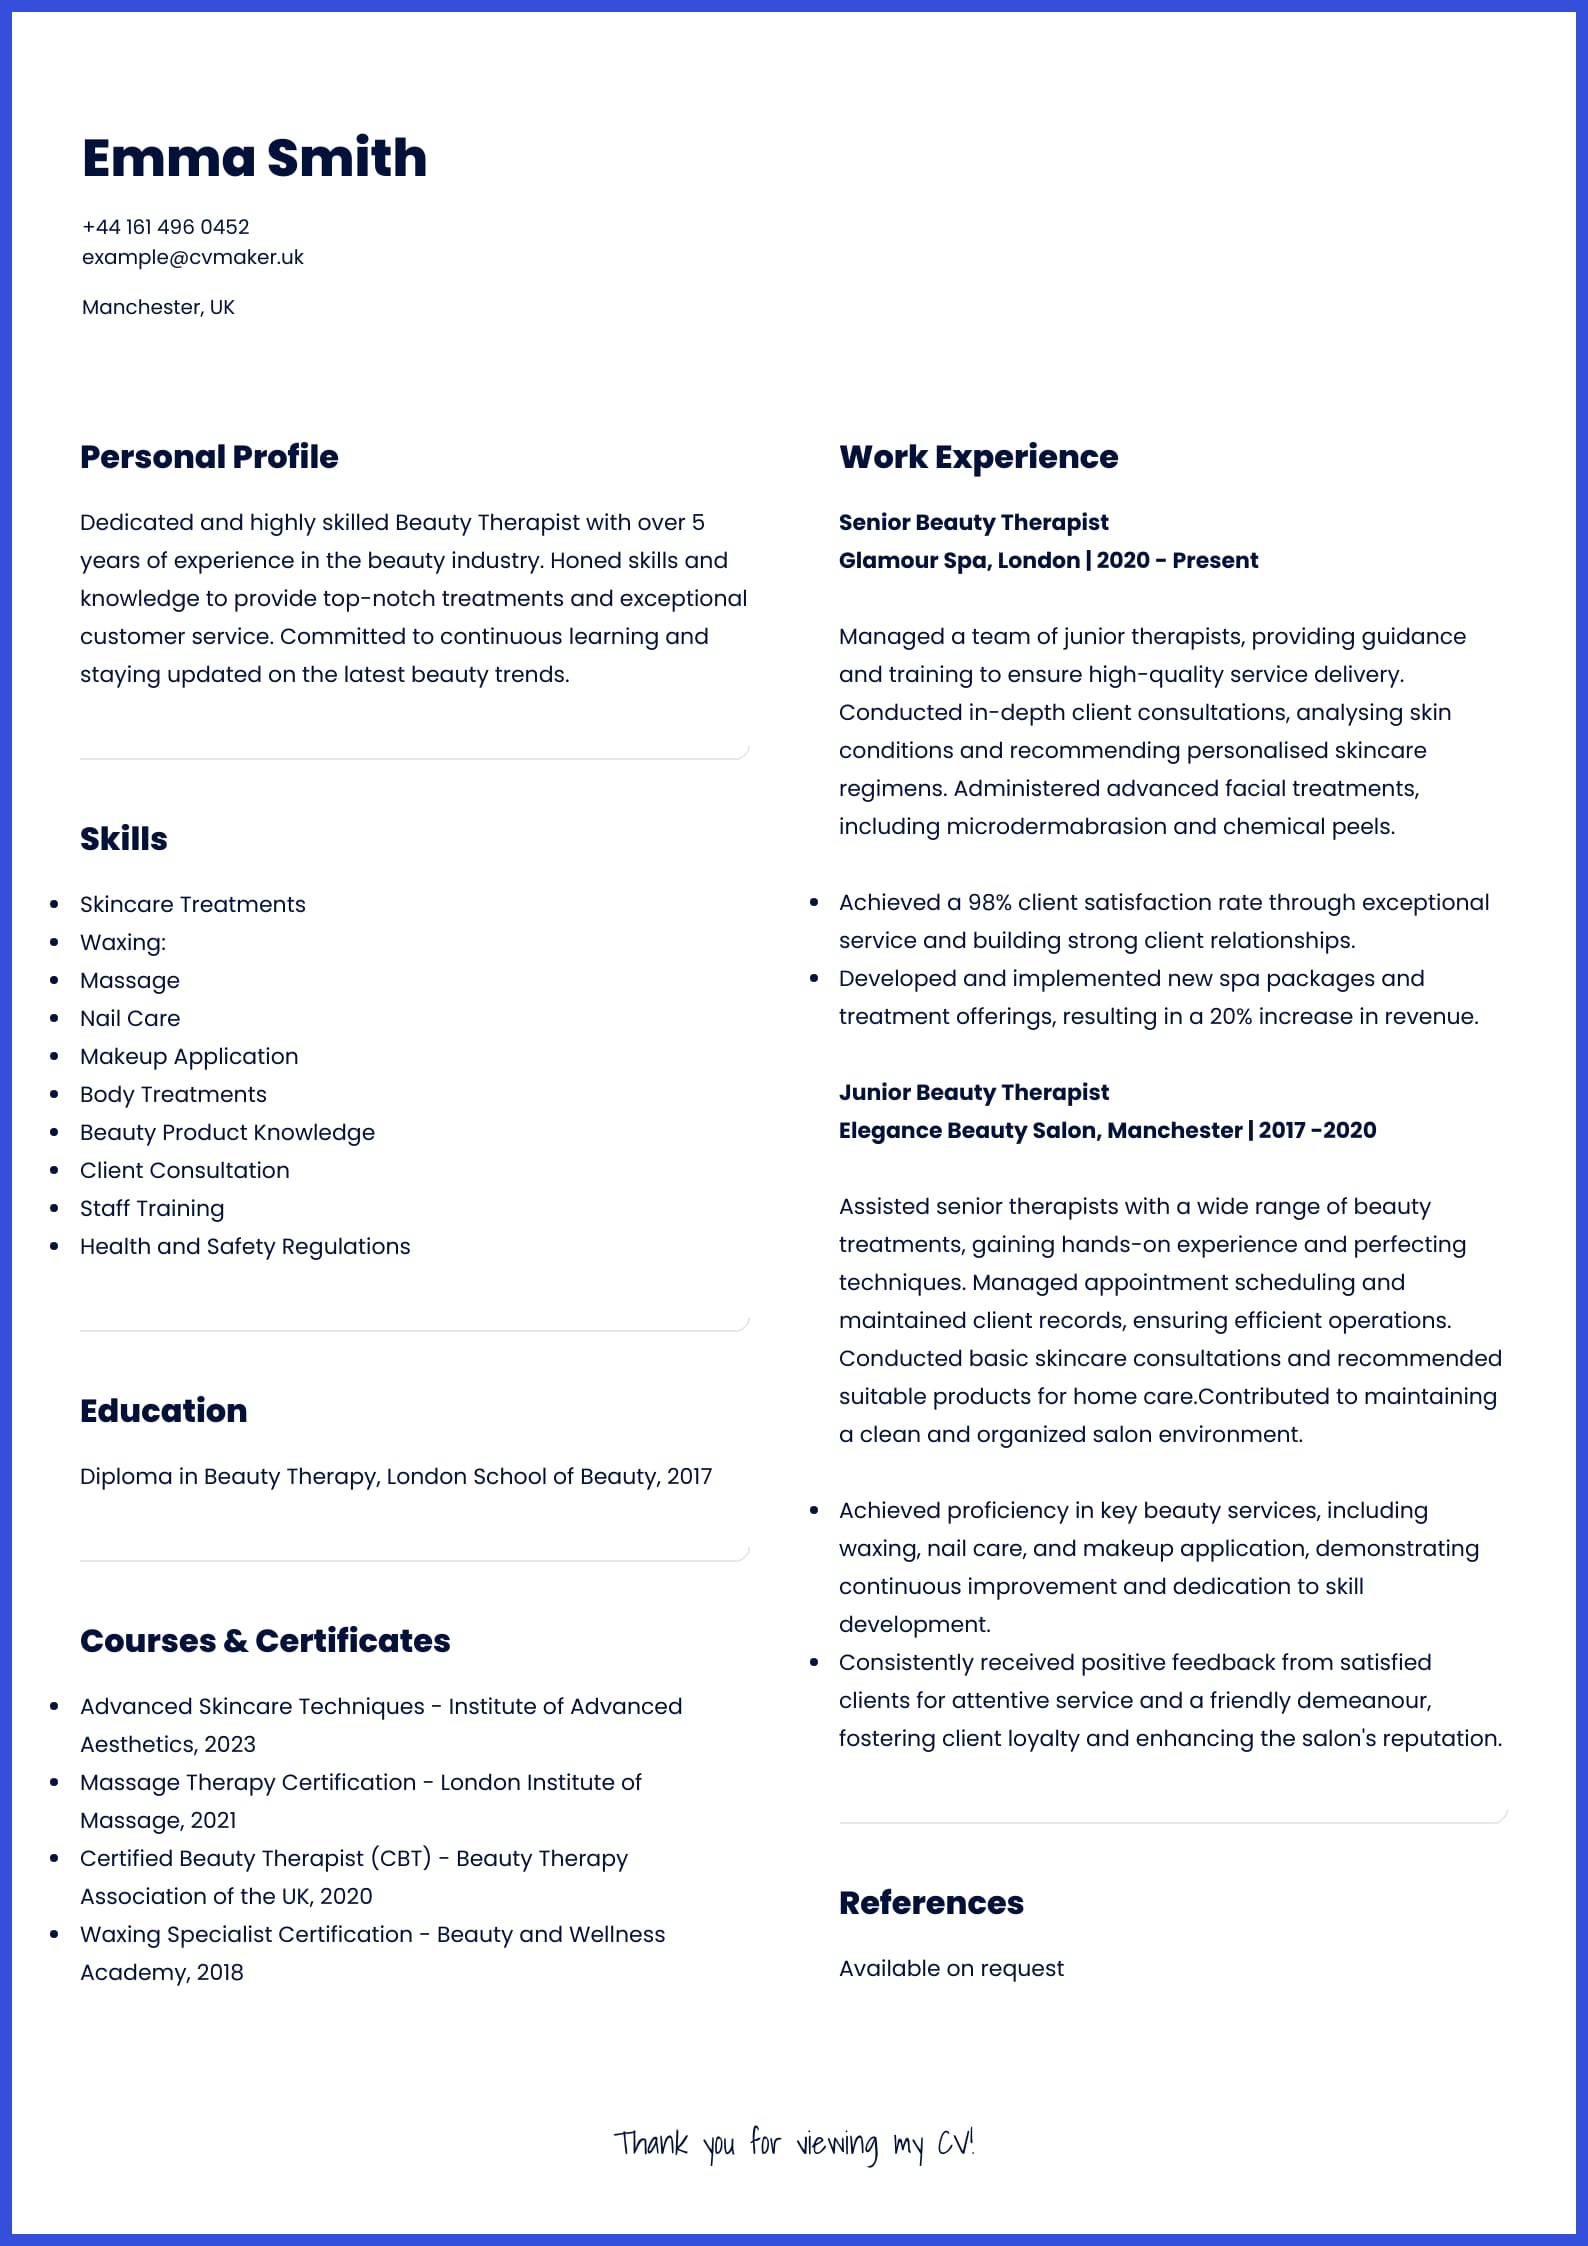 Beauty Therapist CV Example: Free to customise!